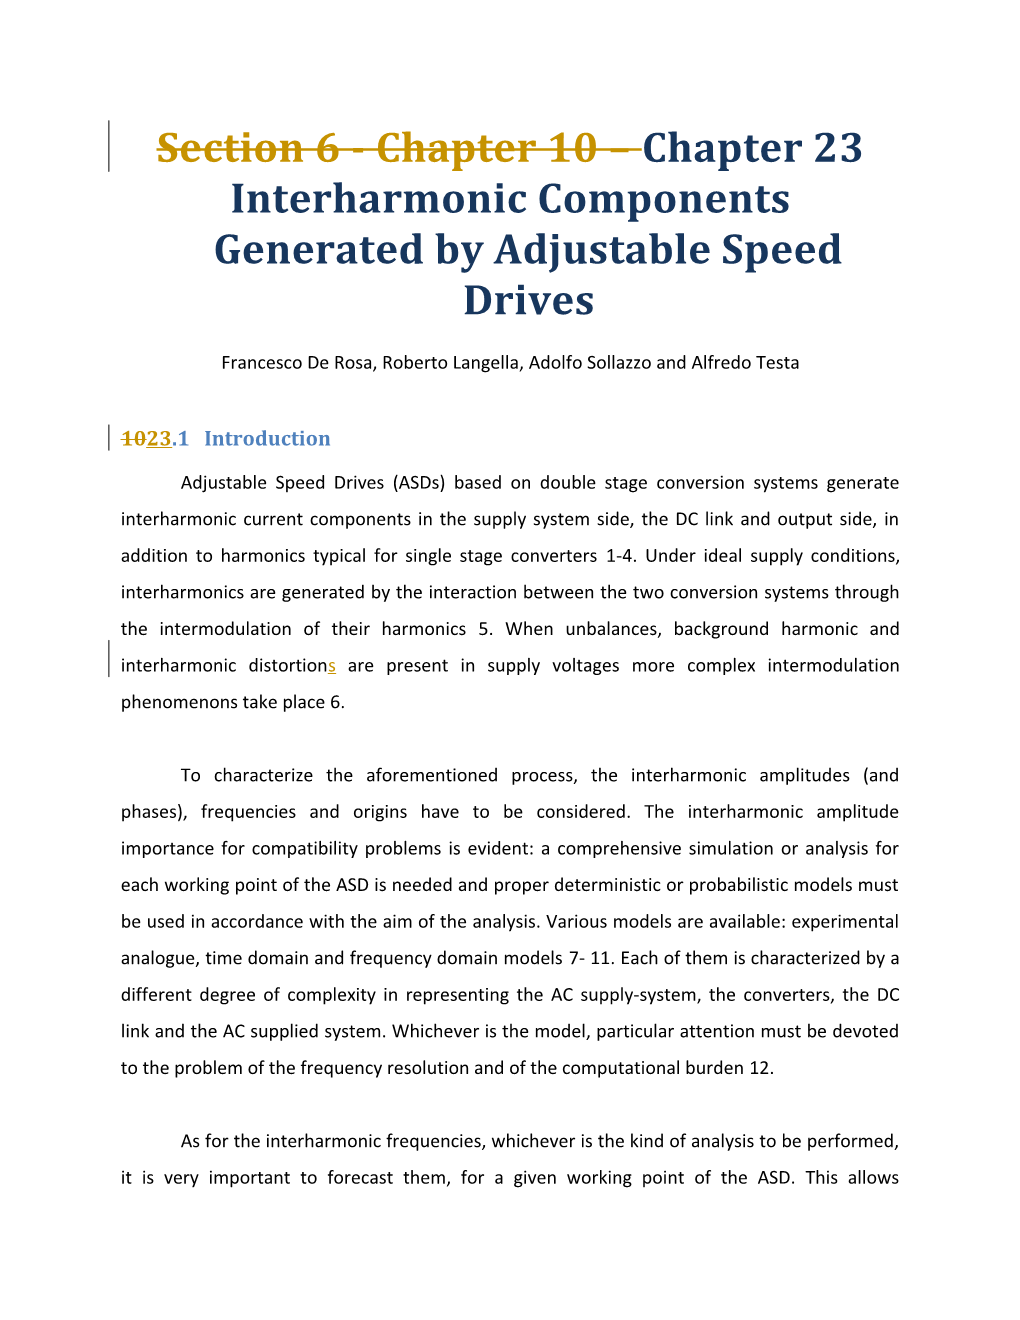 Interharmonic Components Generated by Adjustable Speed Drives